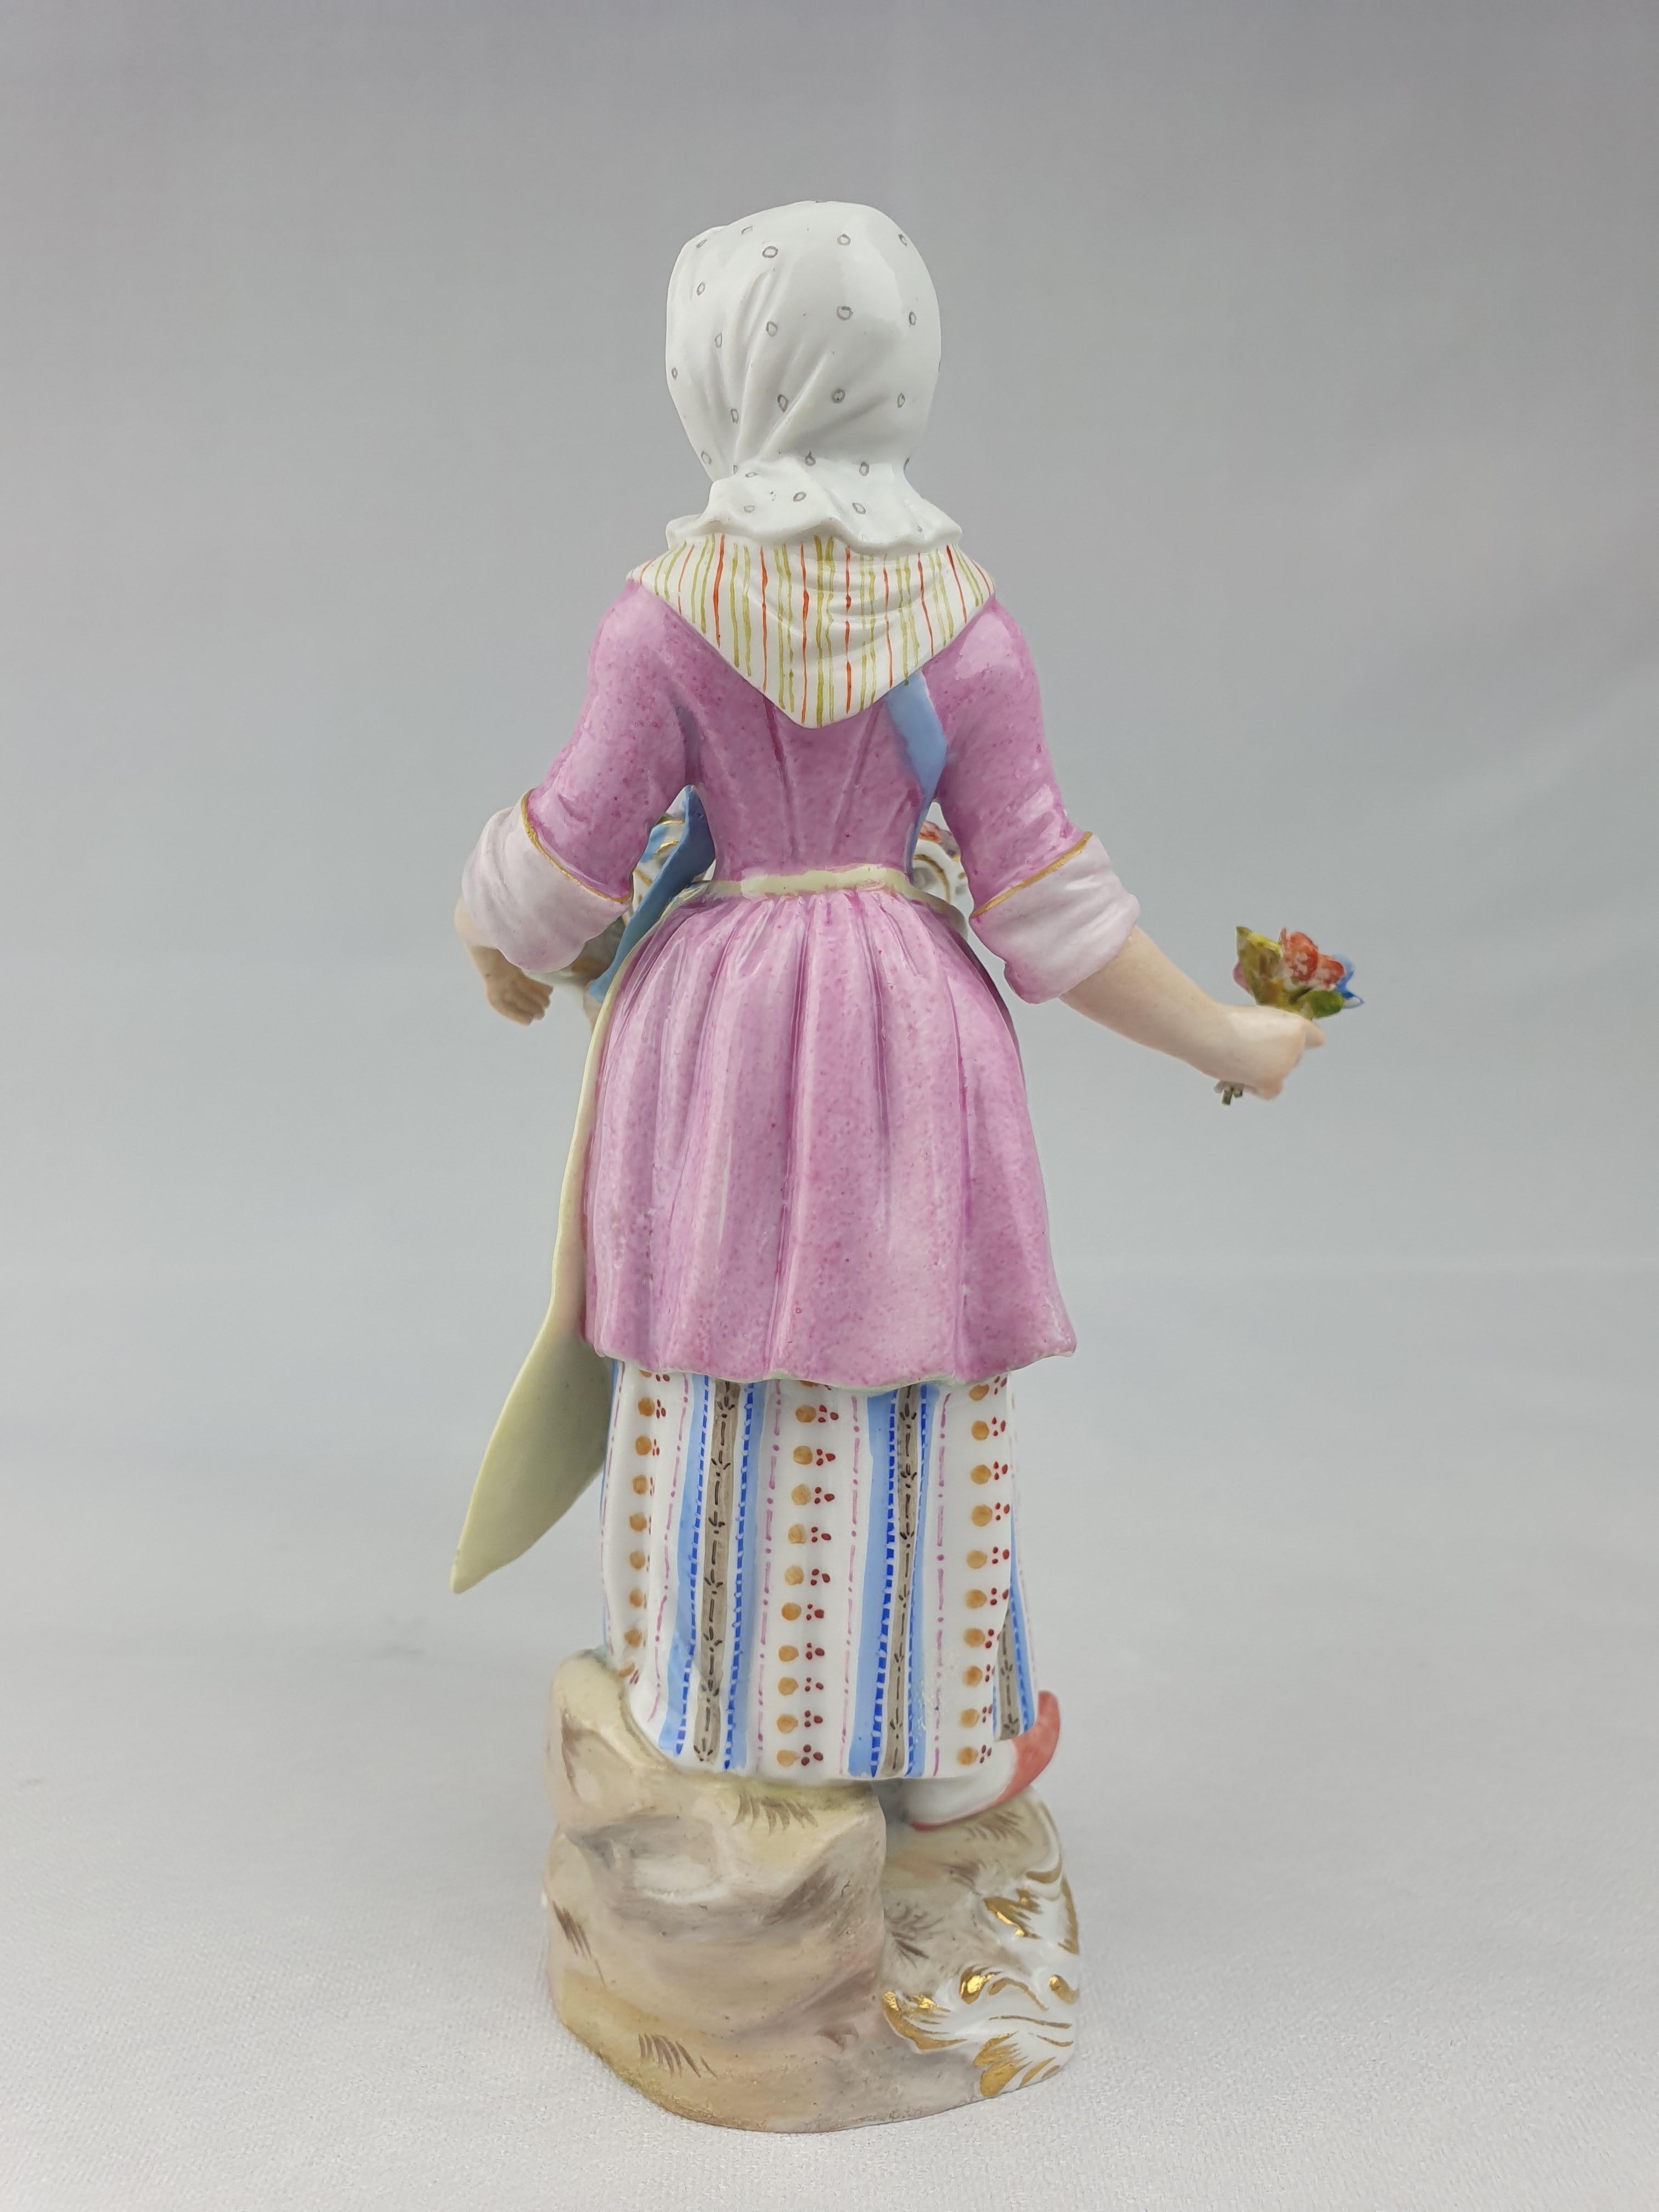 Late 19thc Meissen flower seller from the series of 35 figures known as the Cris of Paris.

Number 16
Height 13.5cm
Cross swords in underglaze blue
Circa 1880.